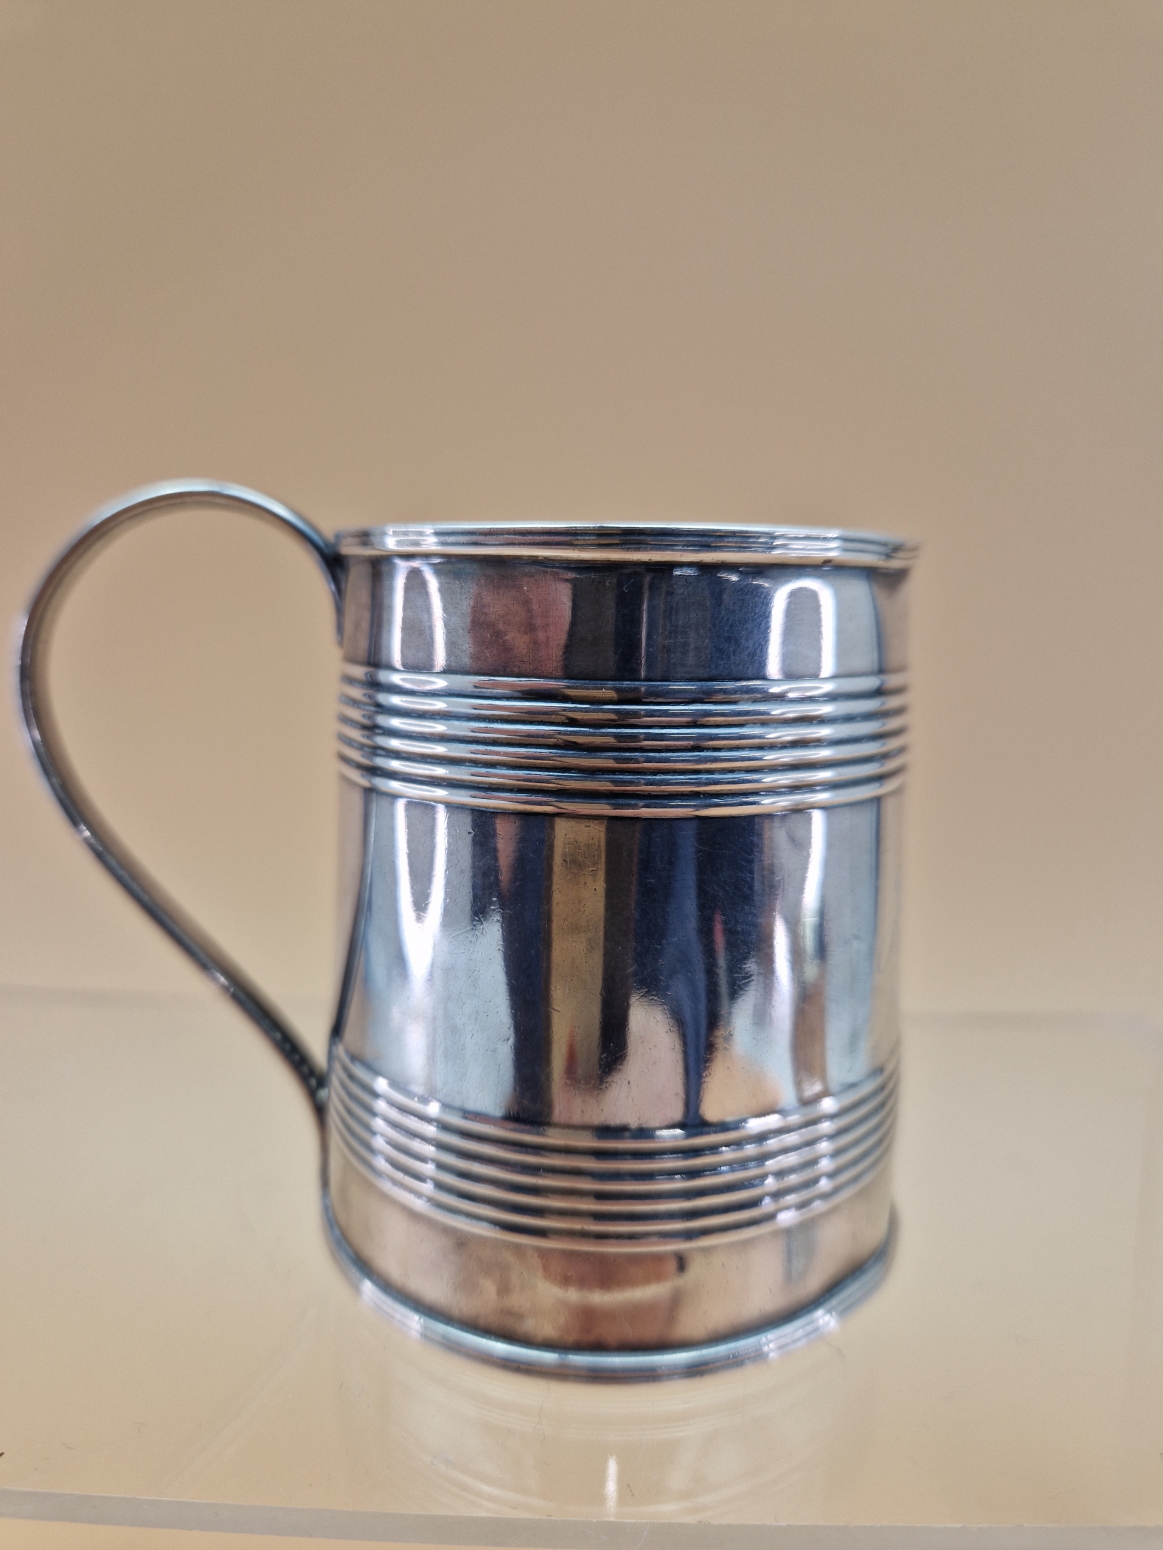 A VICTORIAN SILVER MUG BY WILLIAM HEWITT, LONDON 1838, EMBOSSED WITH FLOWERS TOGETHER WITH A QUARTER - Image 6 of 8